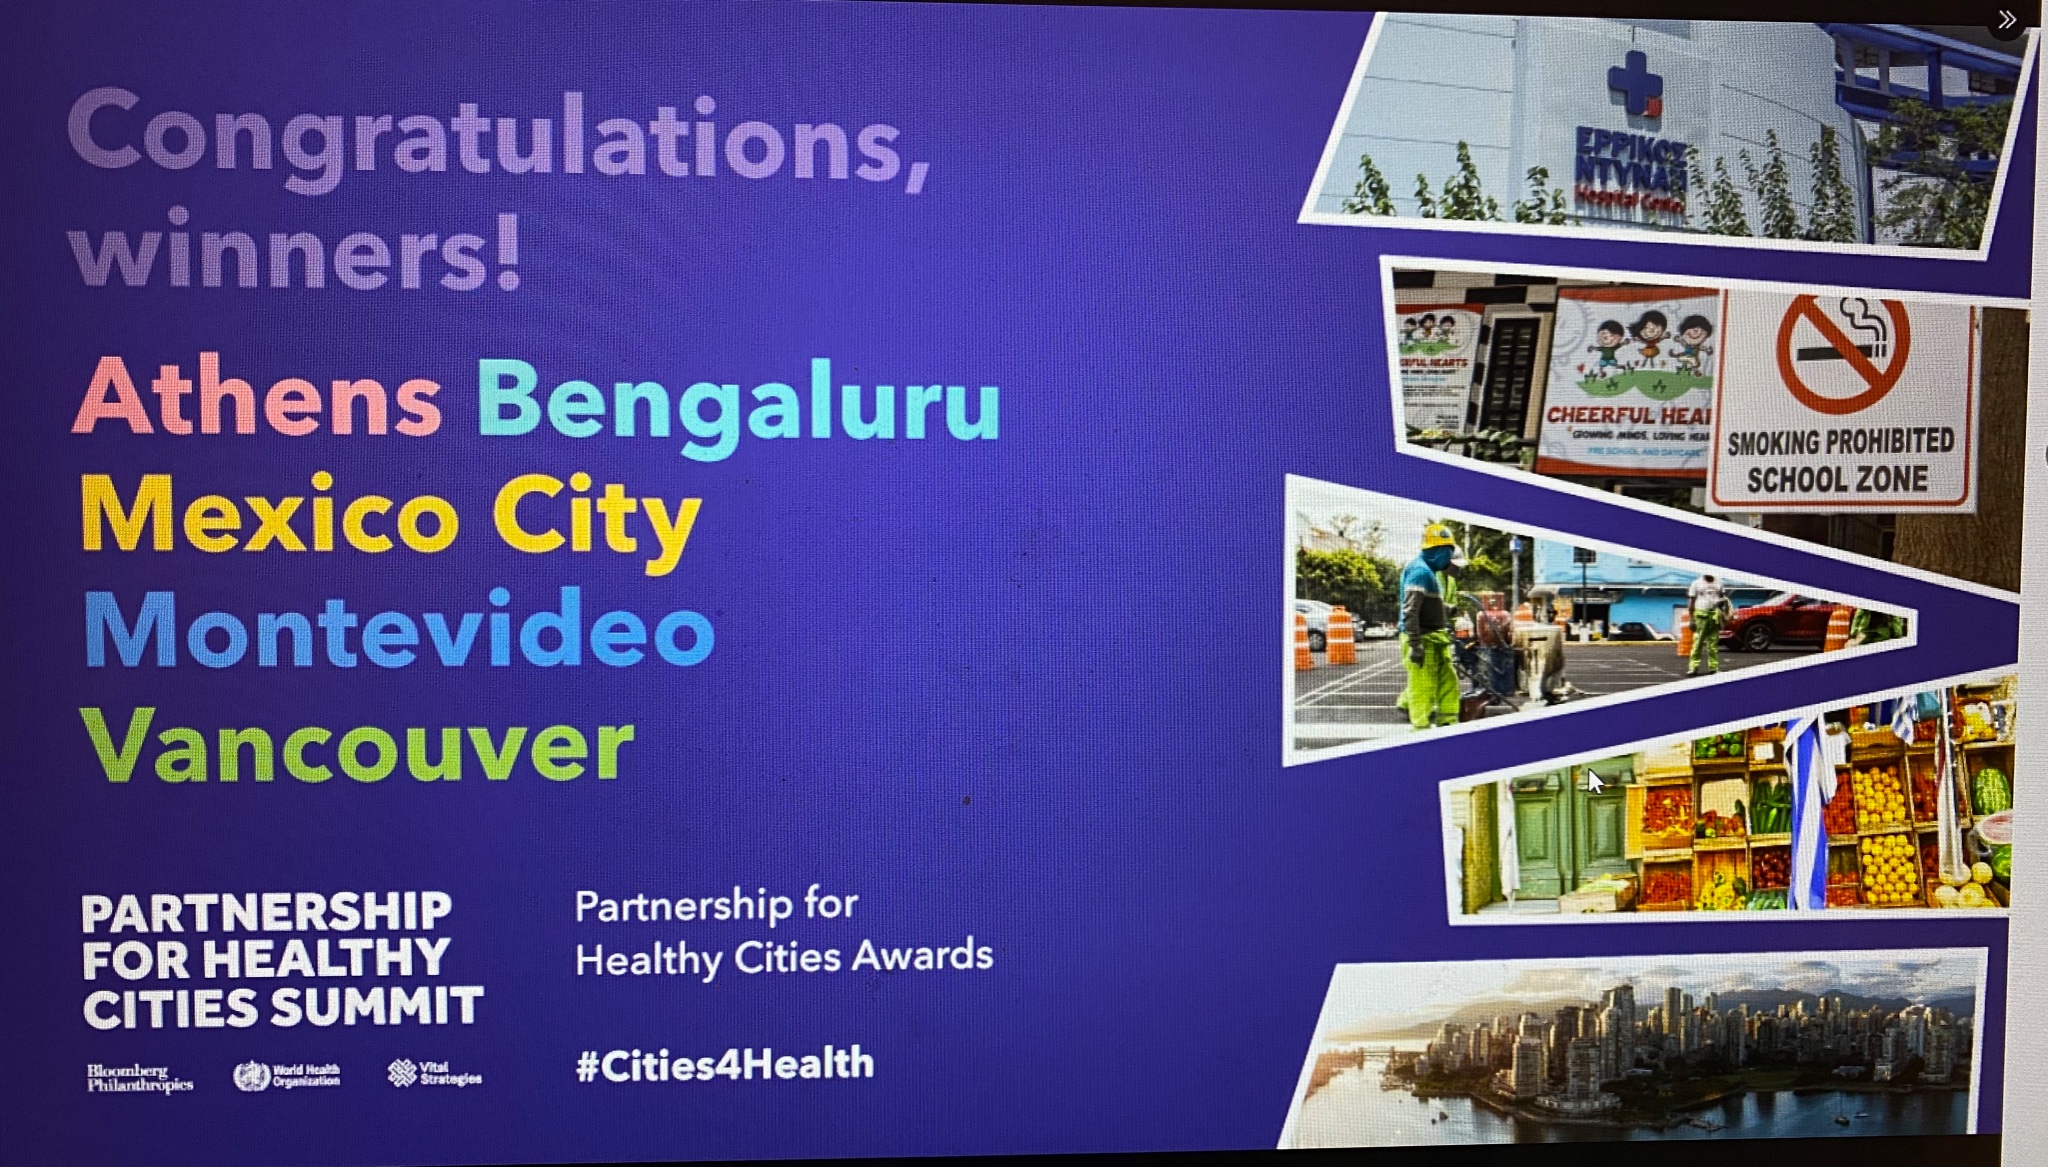 Bengaluru was honored with the 2023 Partnership for Healthy Cities Award.